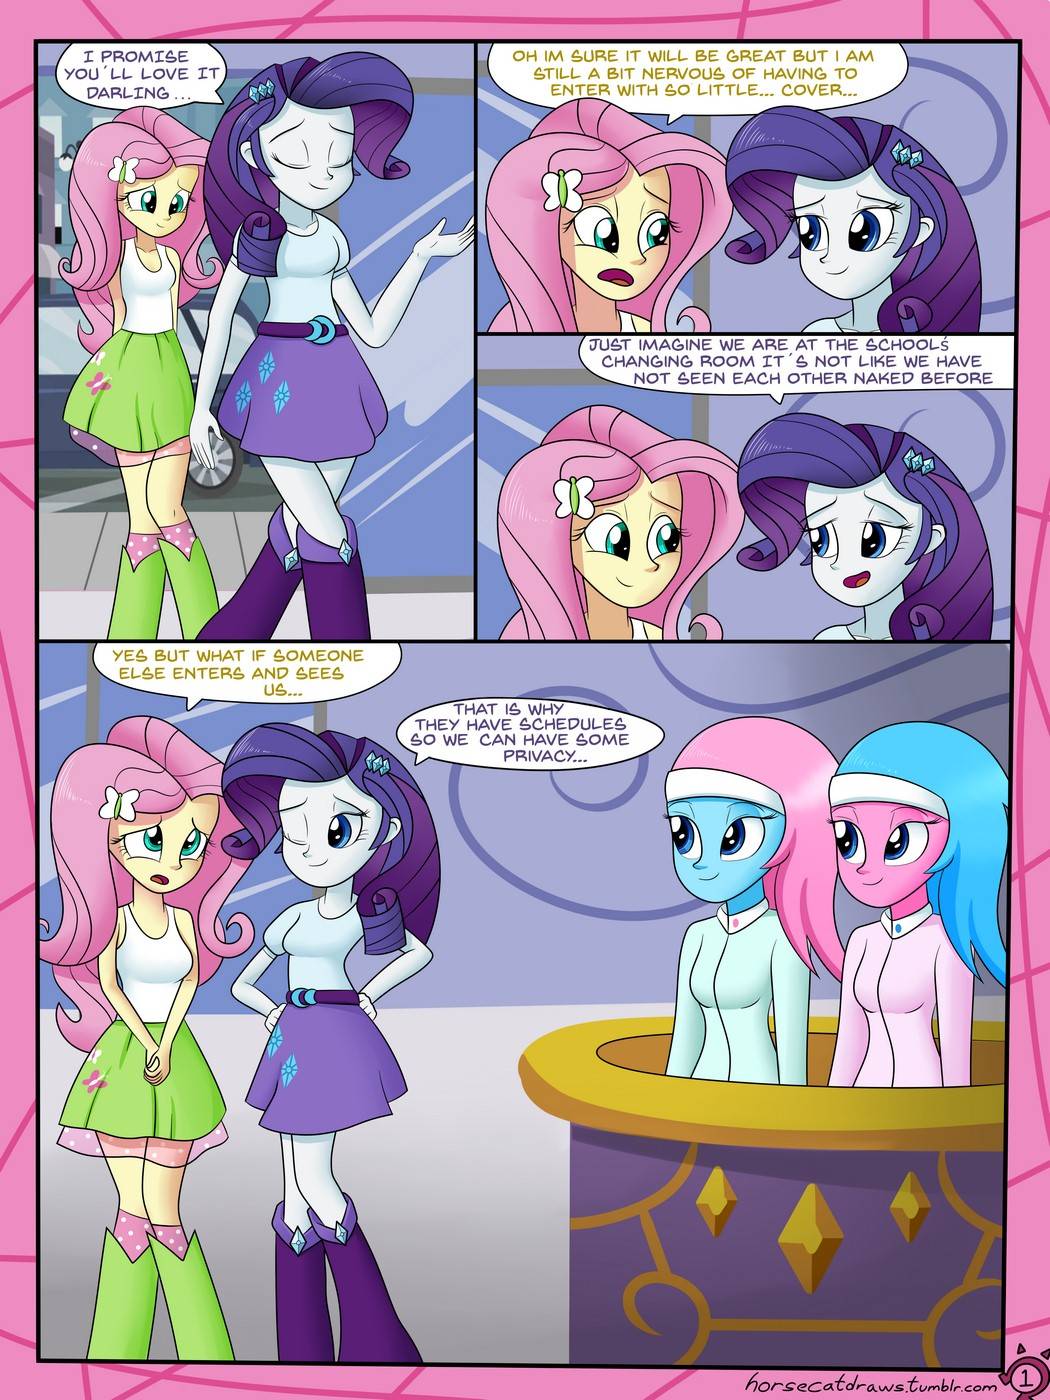 A Very Normal Day At The Spa - Horsecat (My little pony) page 1